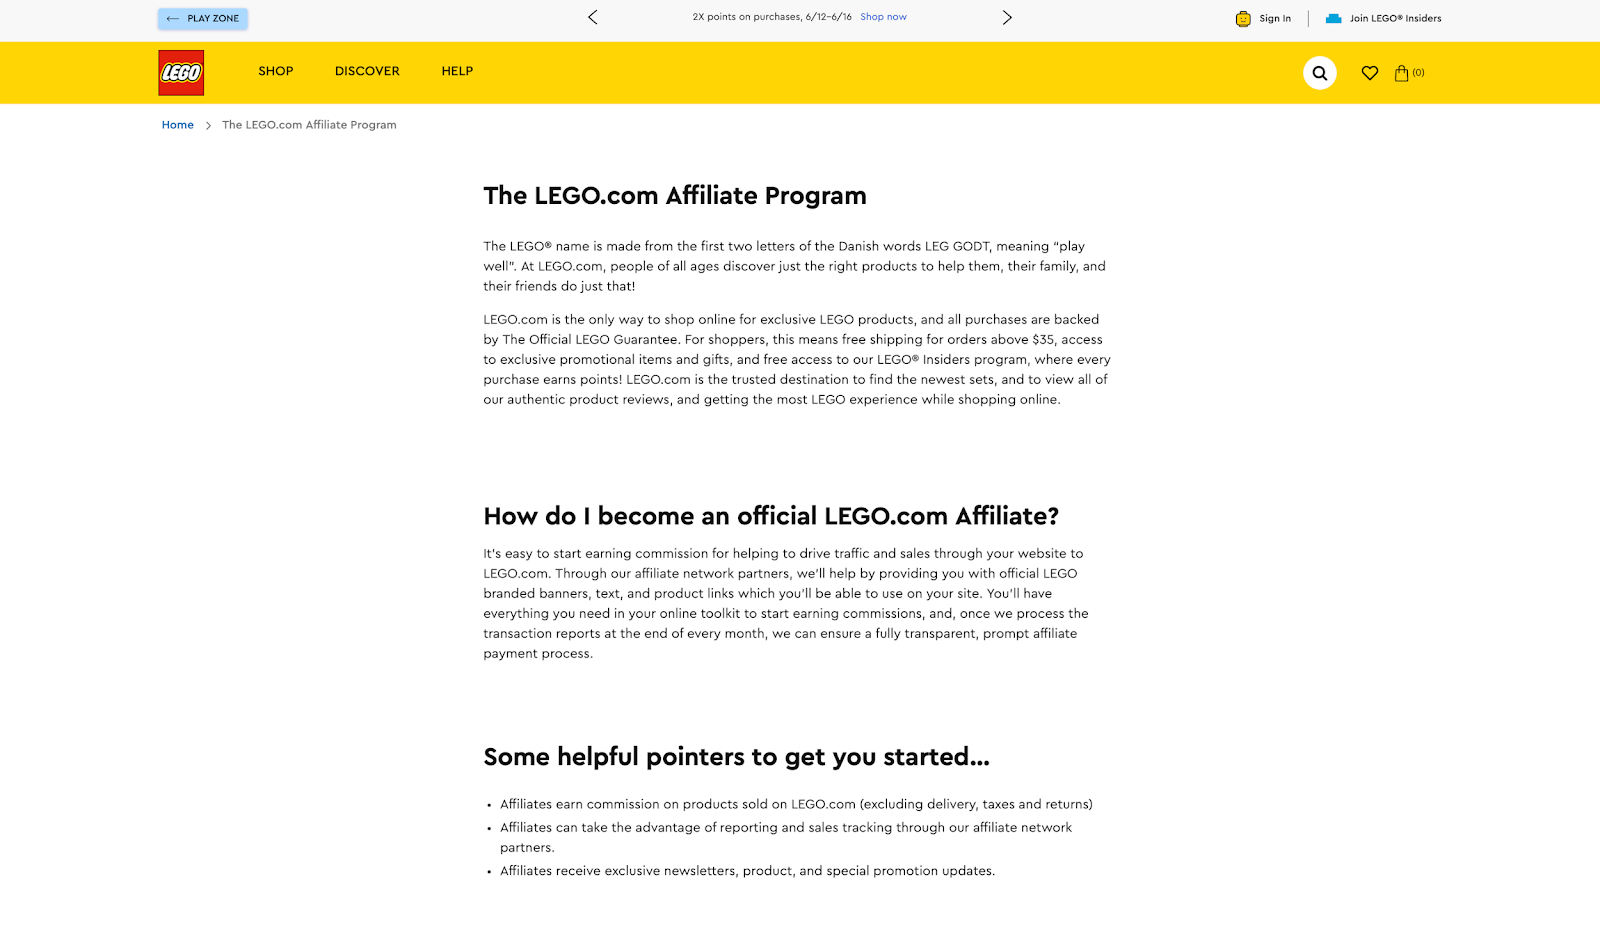 lego affiliate program guidelines and instructions for better to start